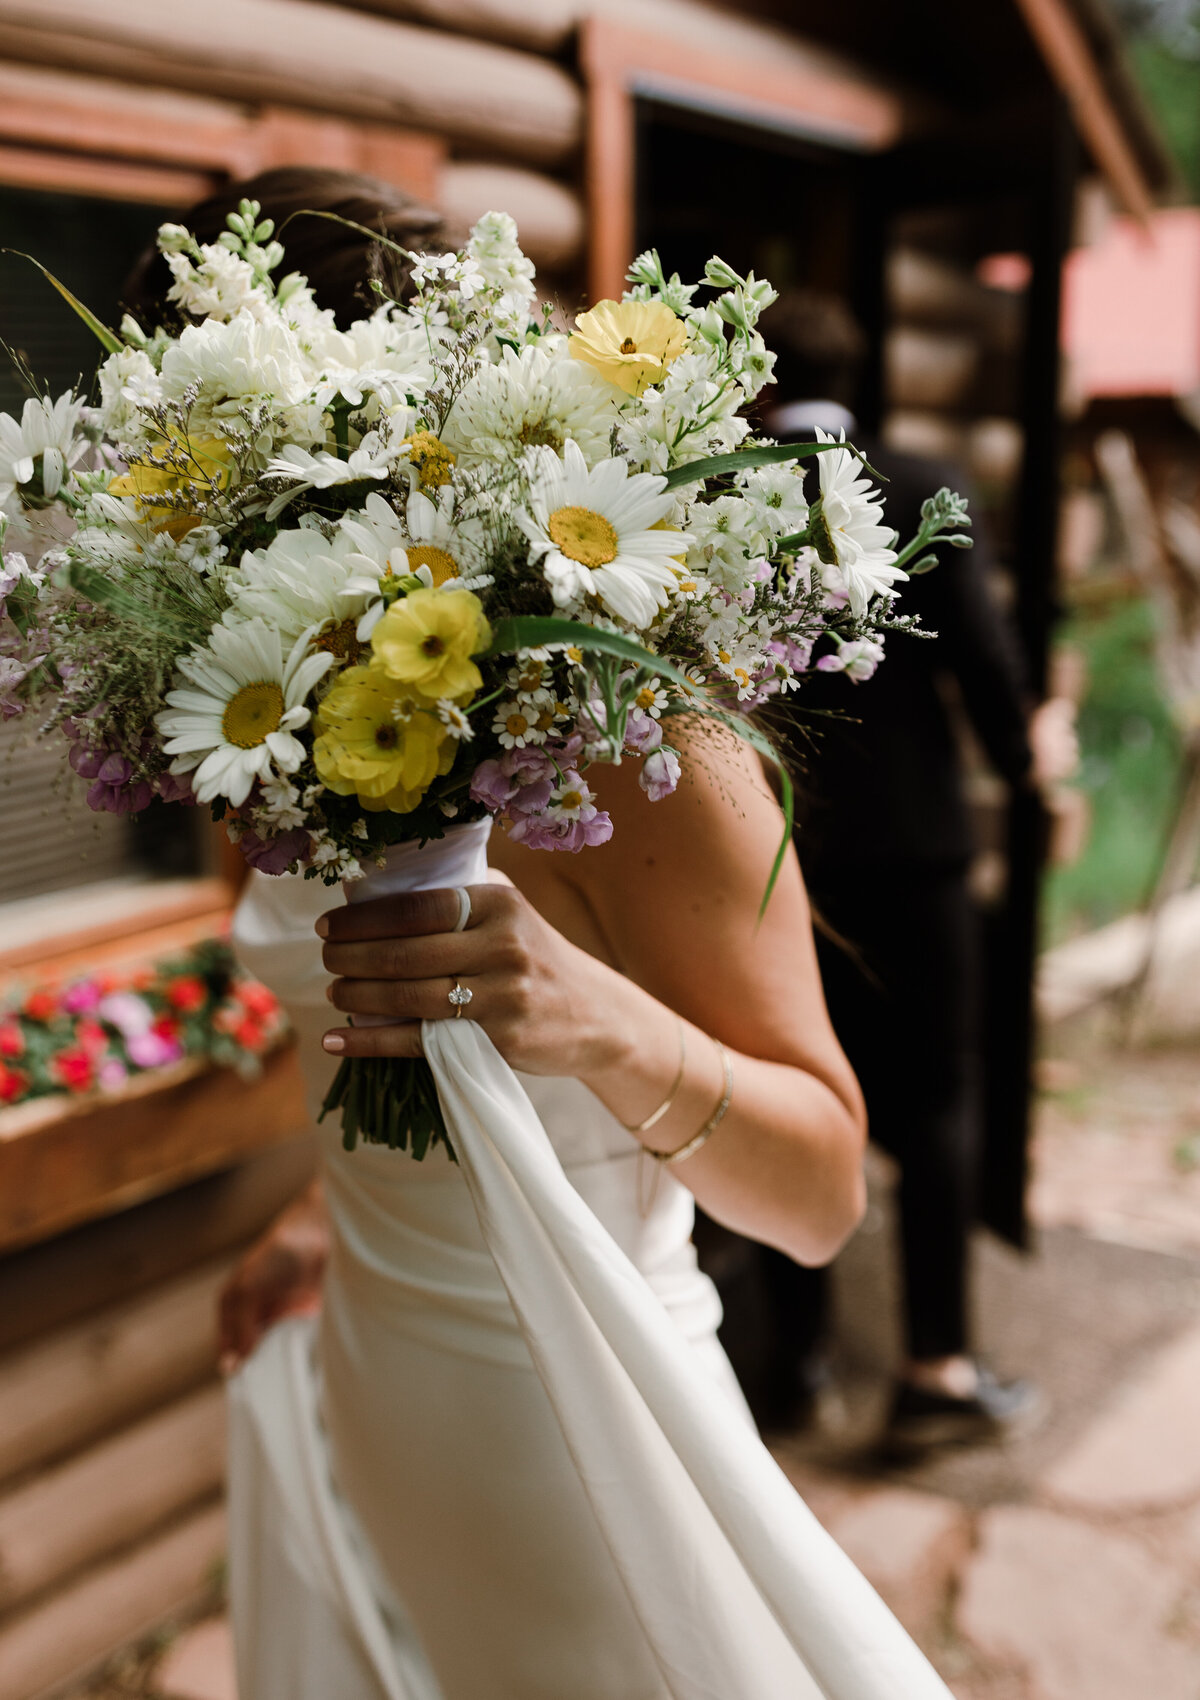 Brides wildflower bouquet of white and yellow florals